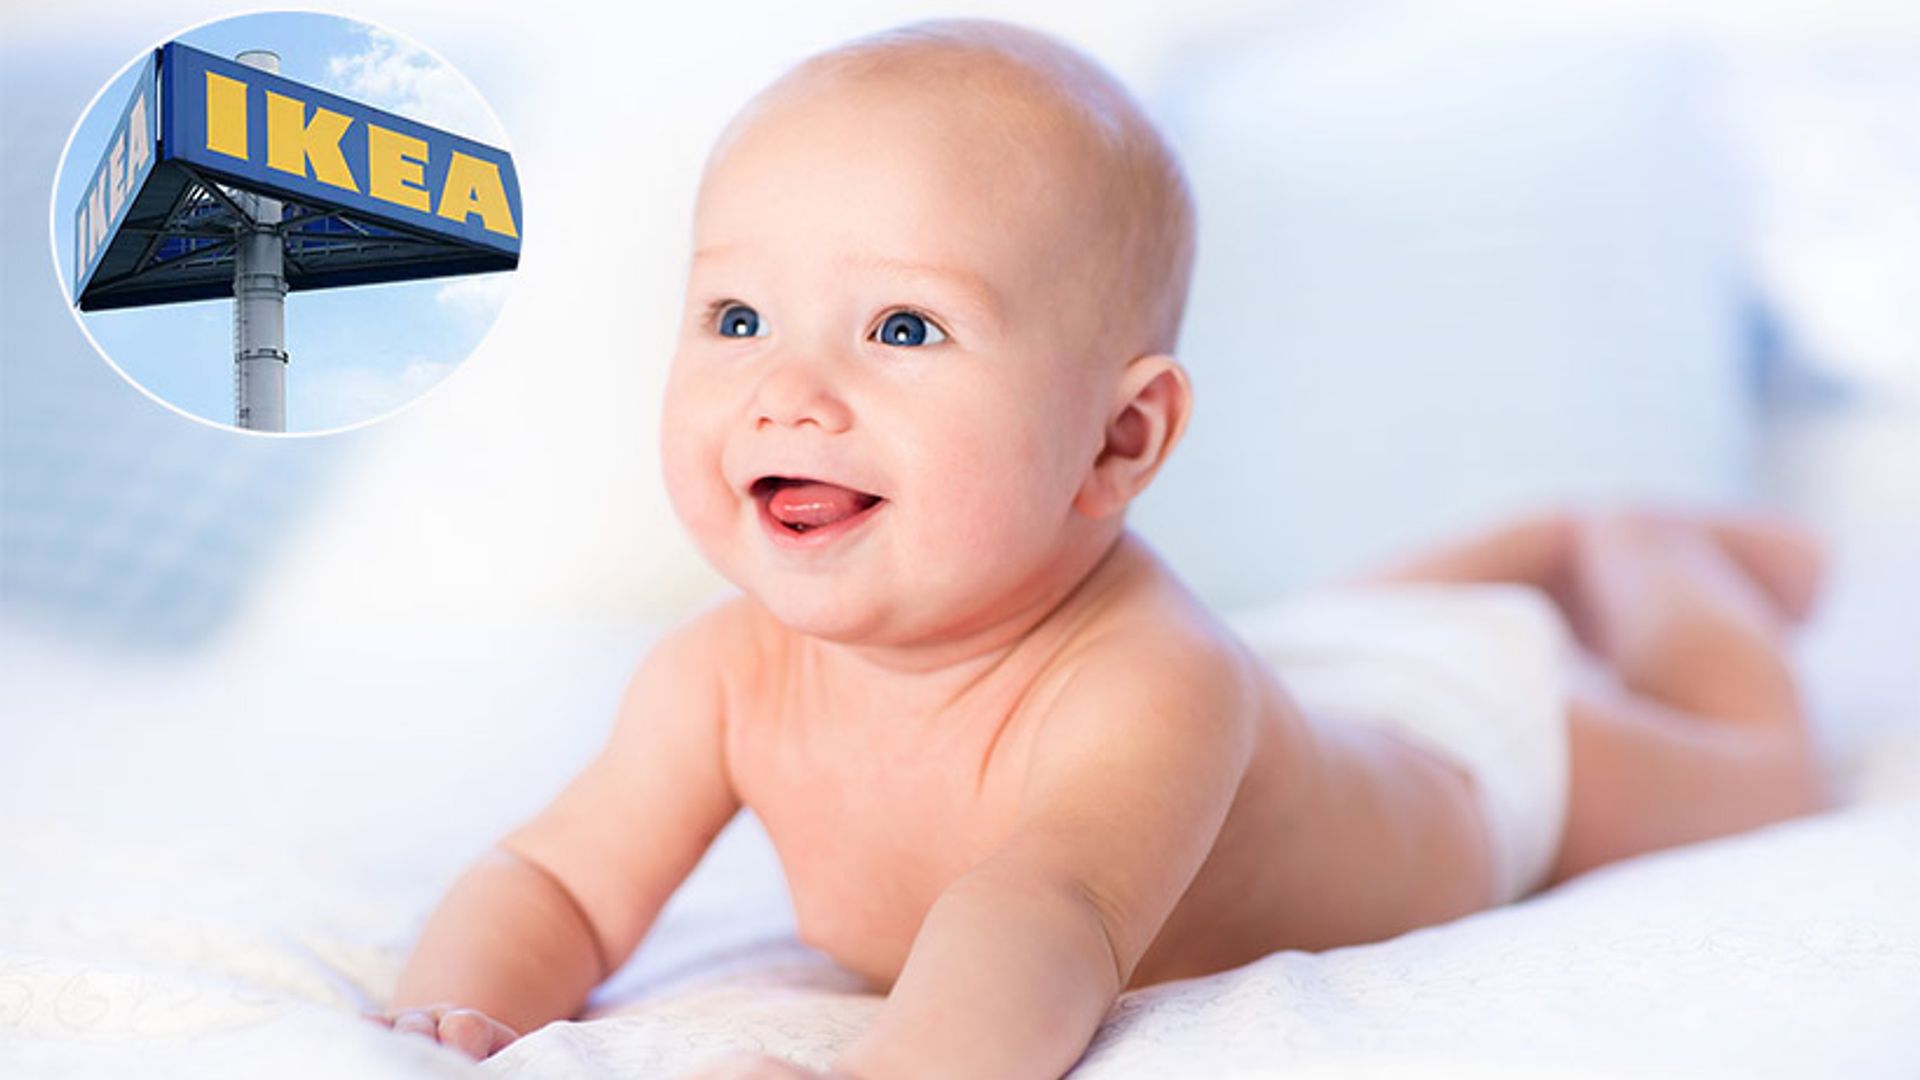 Parents are getting baby name inspiration from IKEA – see some of our favourites